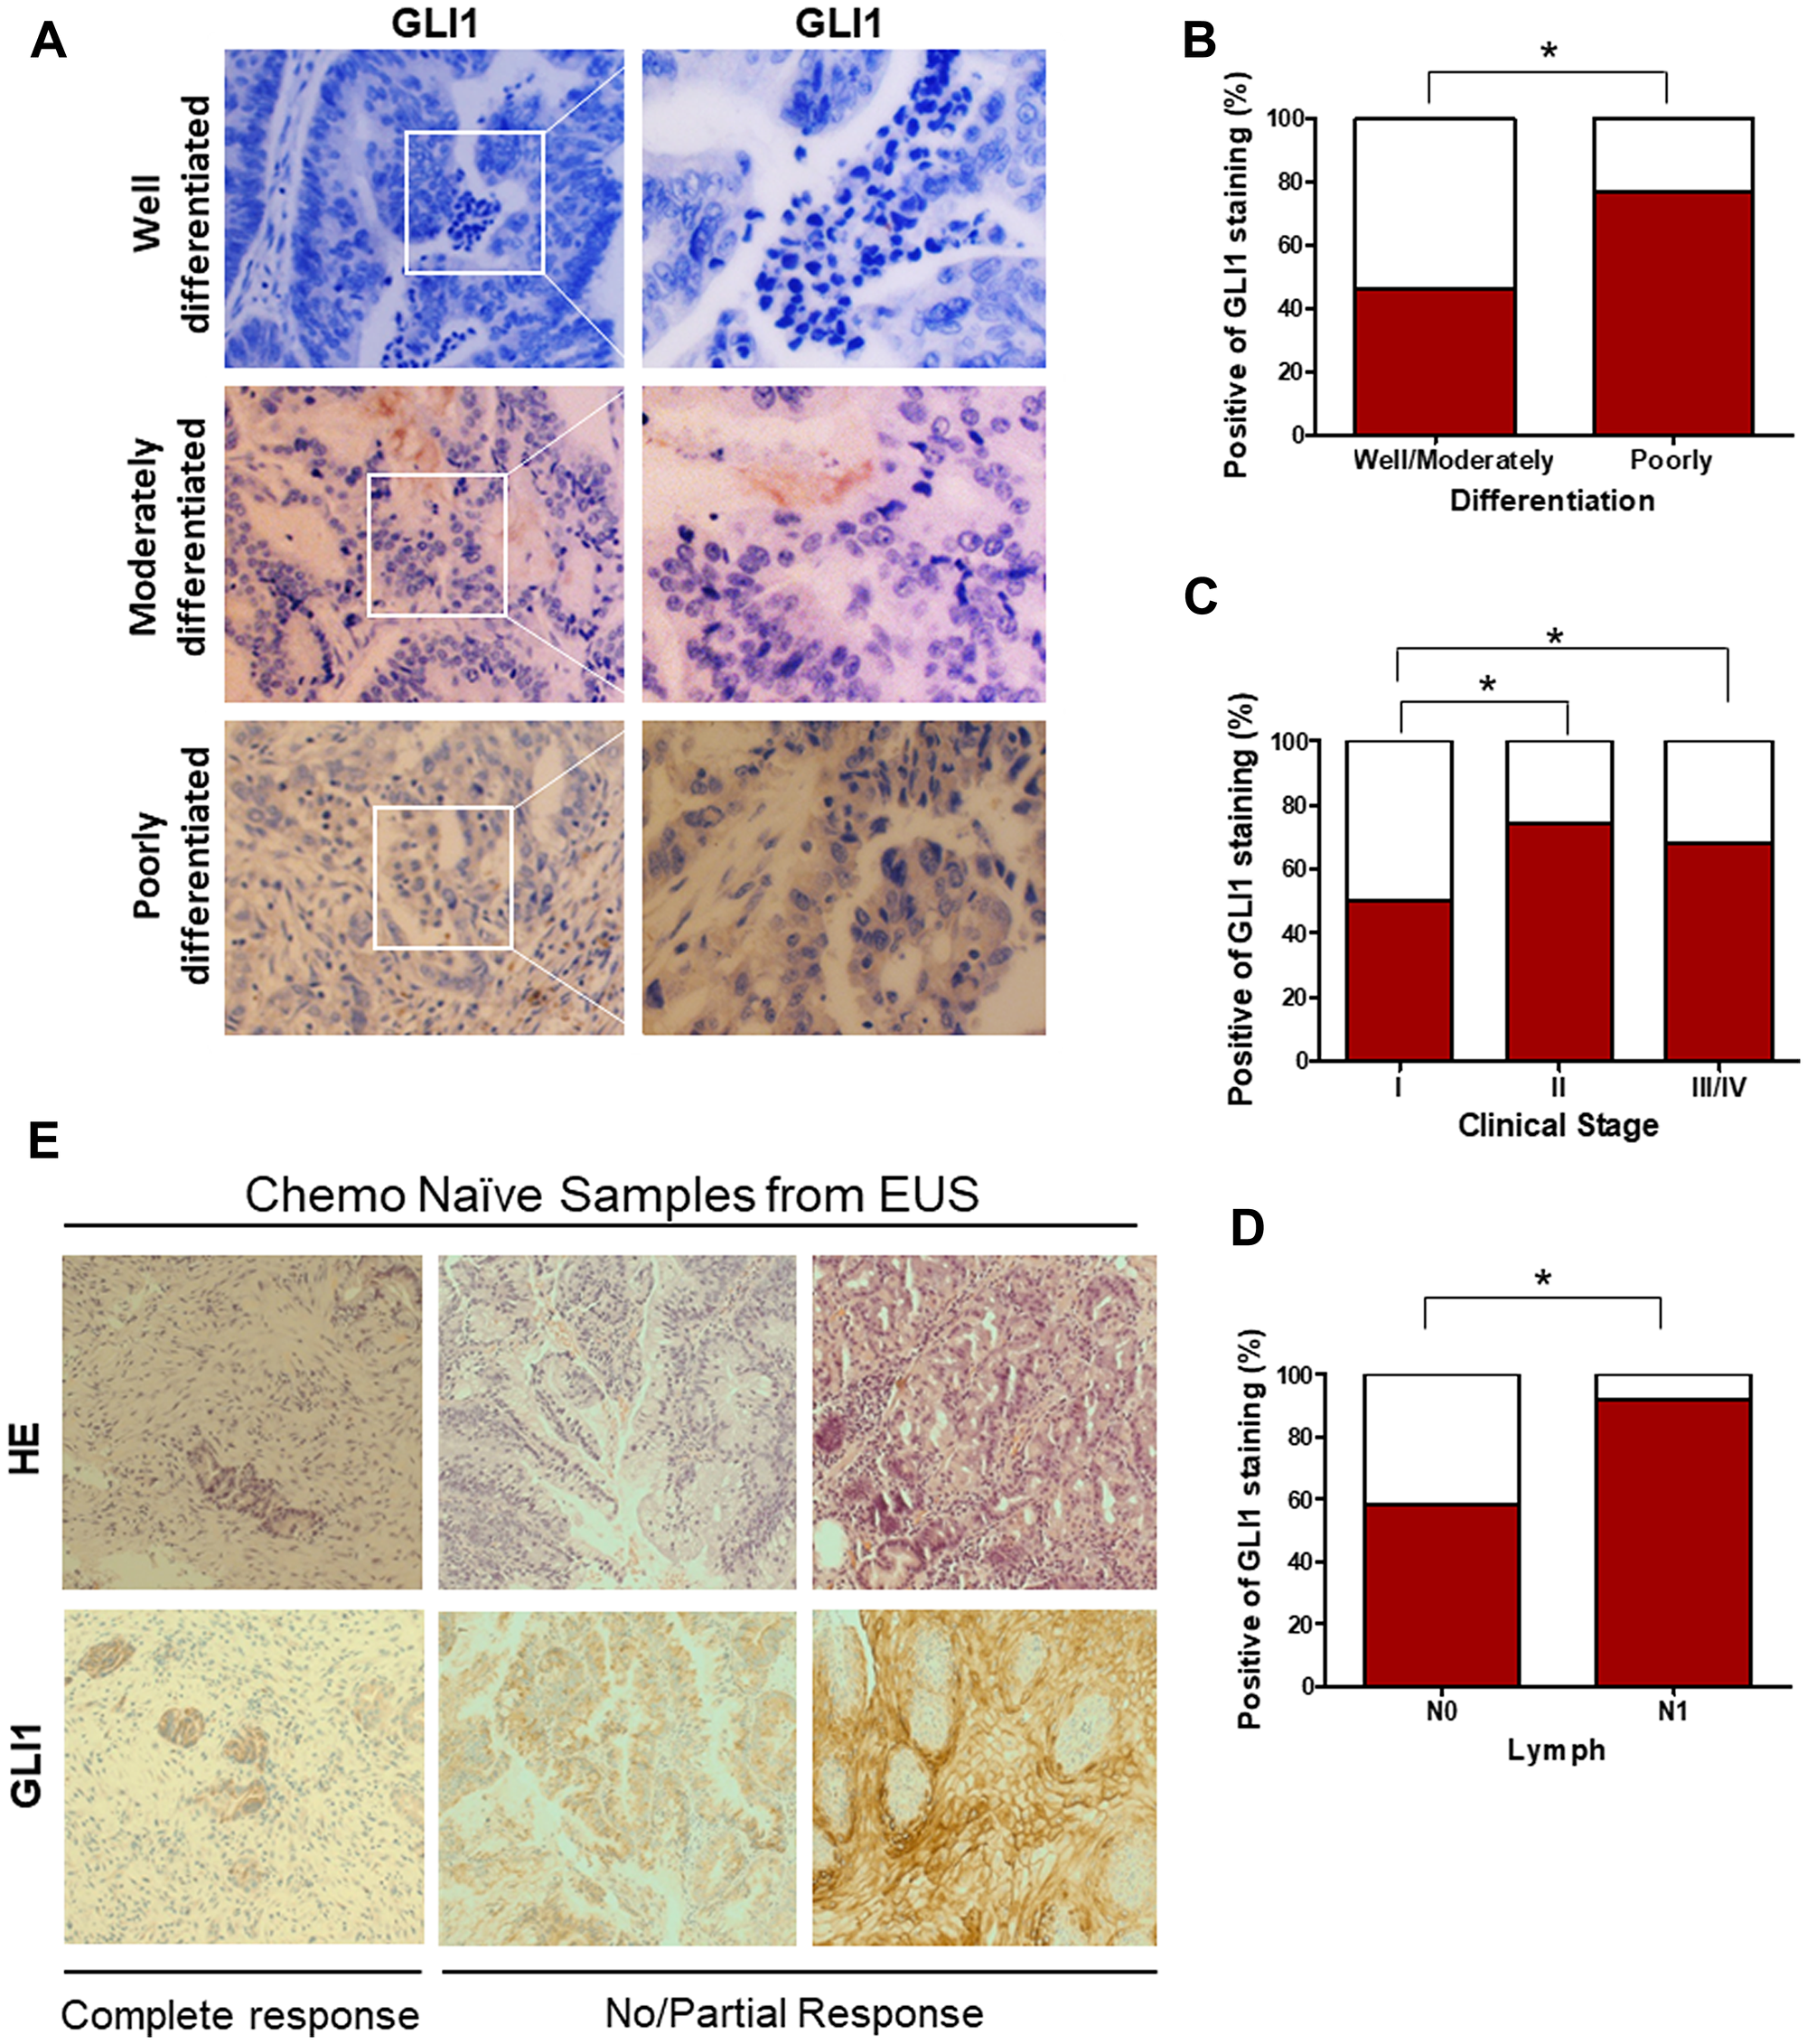 Elevated GLI1 activity is associated with the differentiation state and clinical stage of EAC, drives resistance to the chemotherapy.